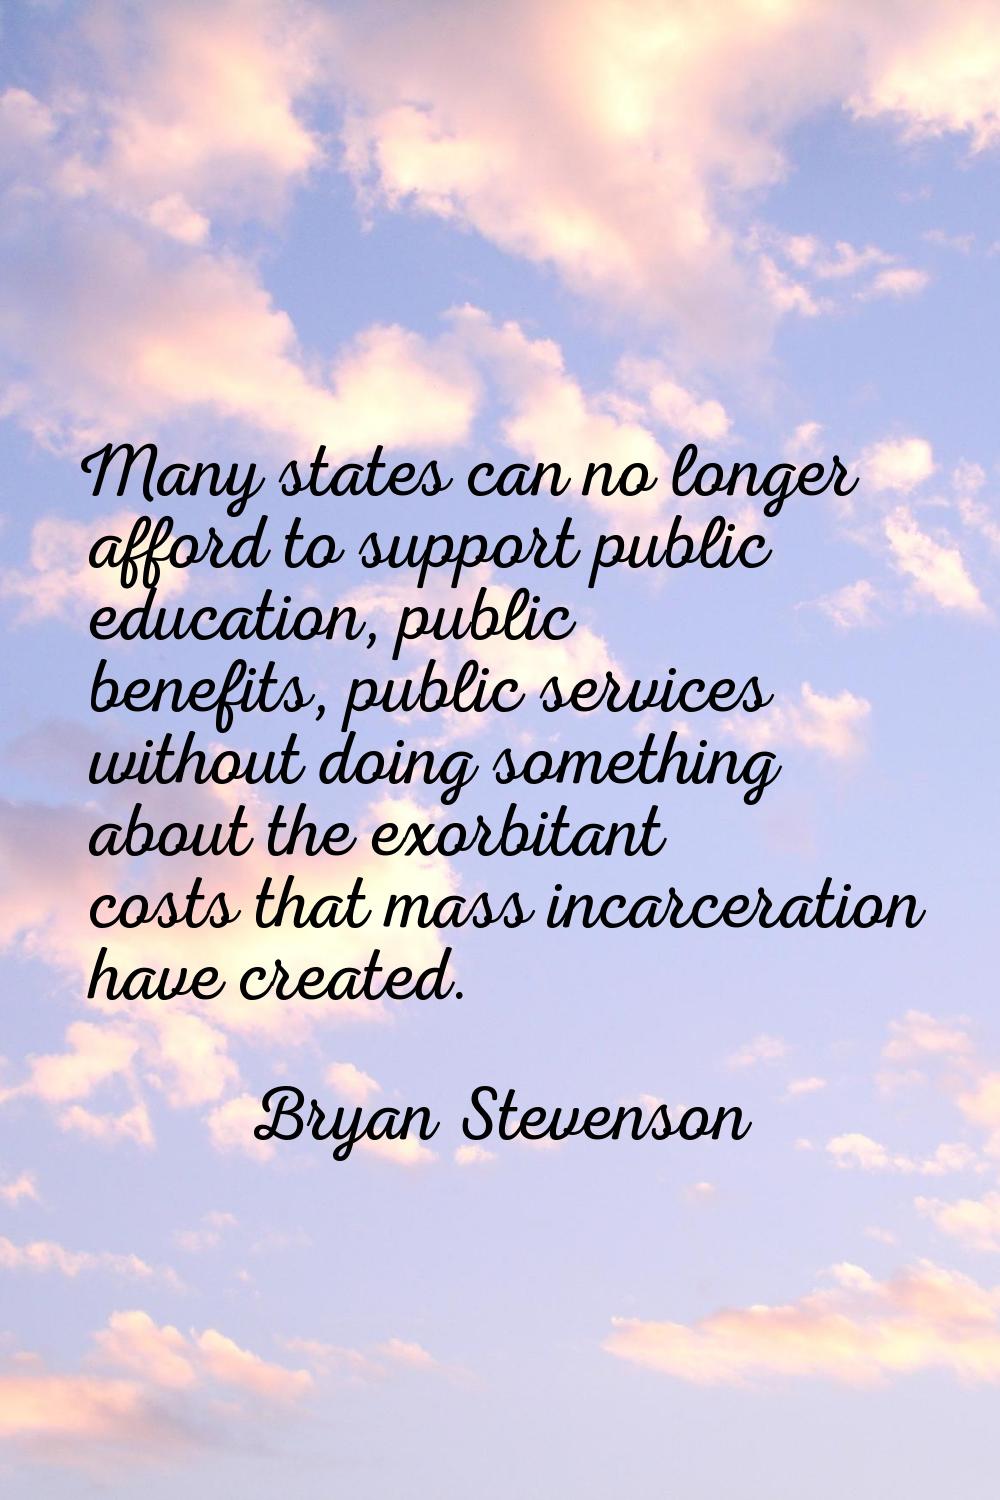 Many states can no longer afford to support public education, public benefits, public services with